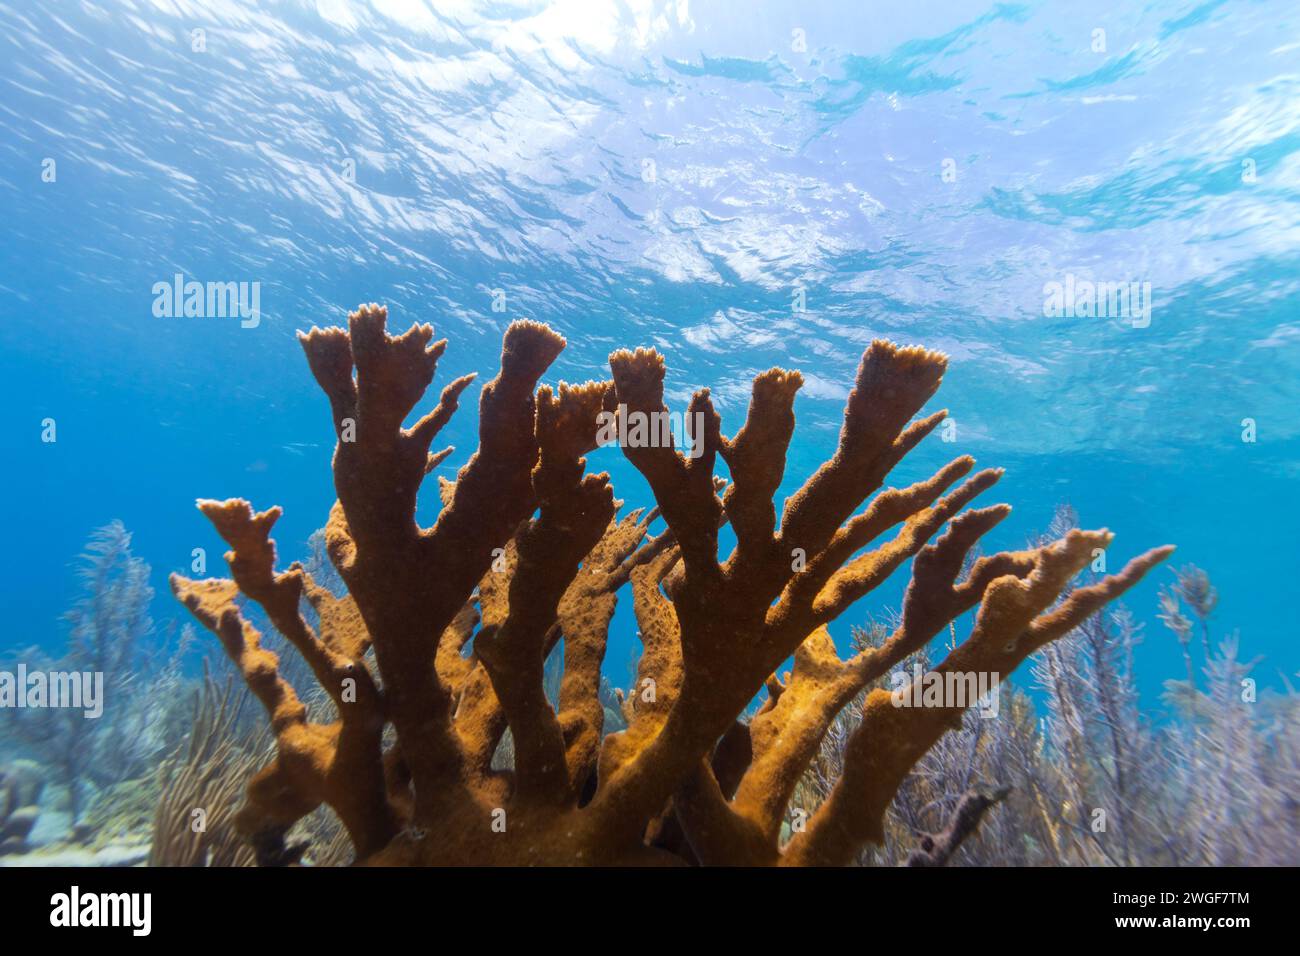 Healthy Elkhorn coral in a reef landscape with various hard corals Stock Photo